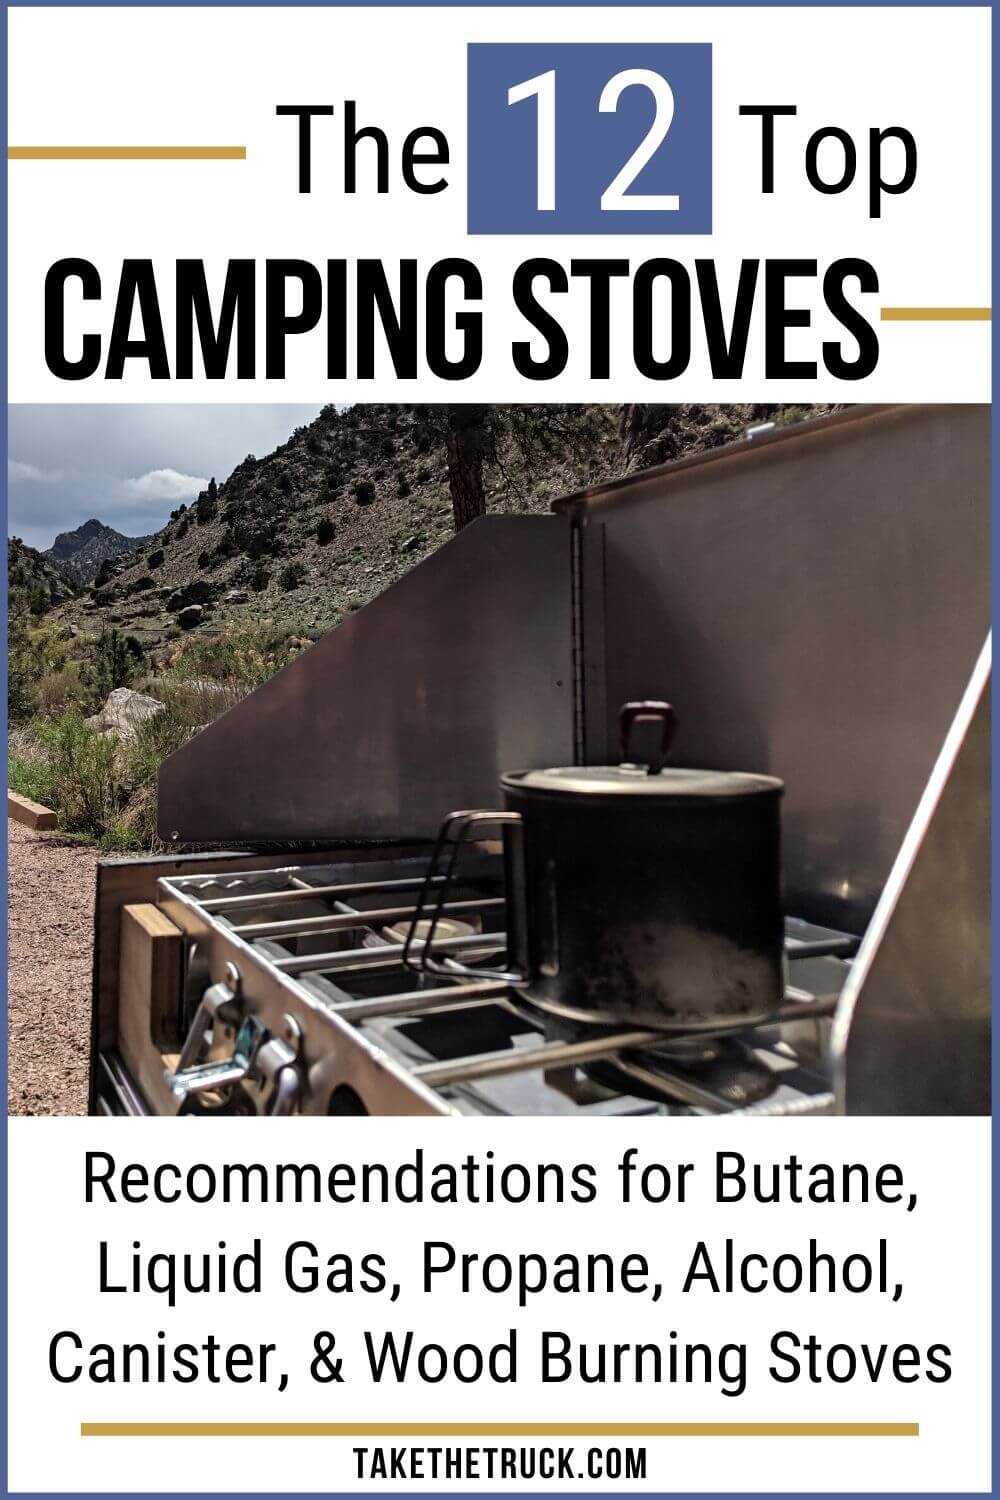 The 12 best camping stoves organized by fuel type: gas camp stoves, wood burning camp stoves, alcohol camp stoves, propane camping stoves, butane camping stoves, canister stoves for camping.